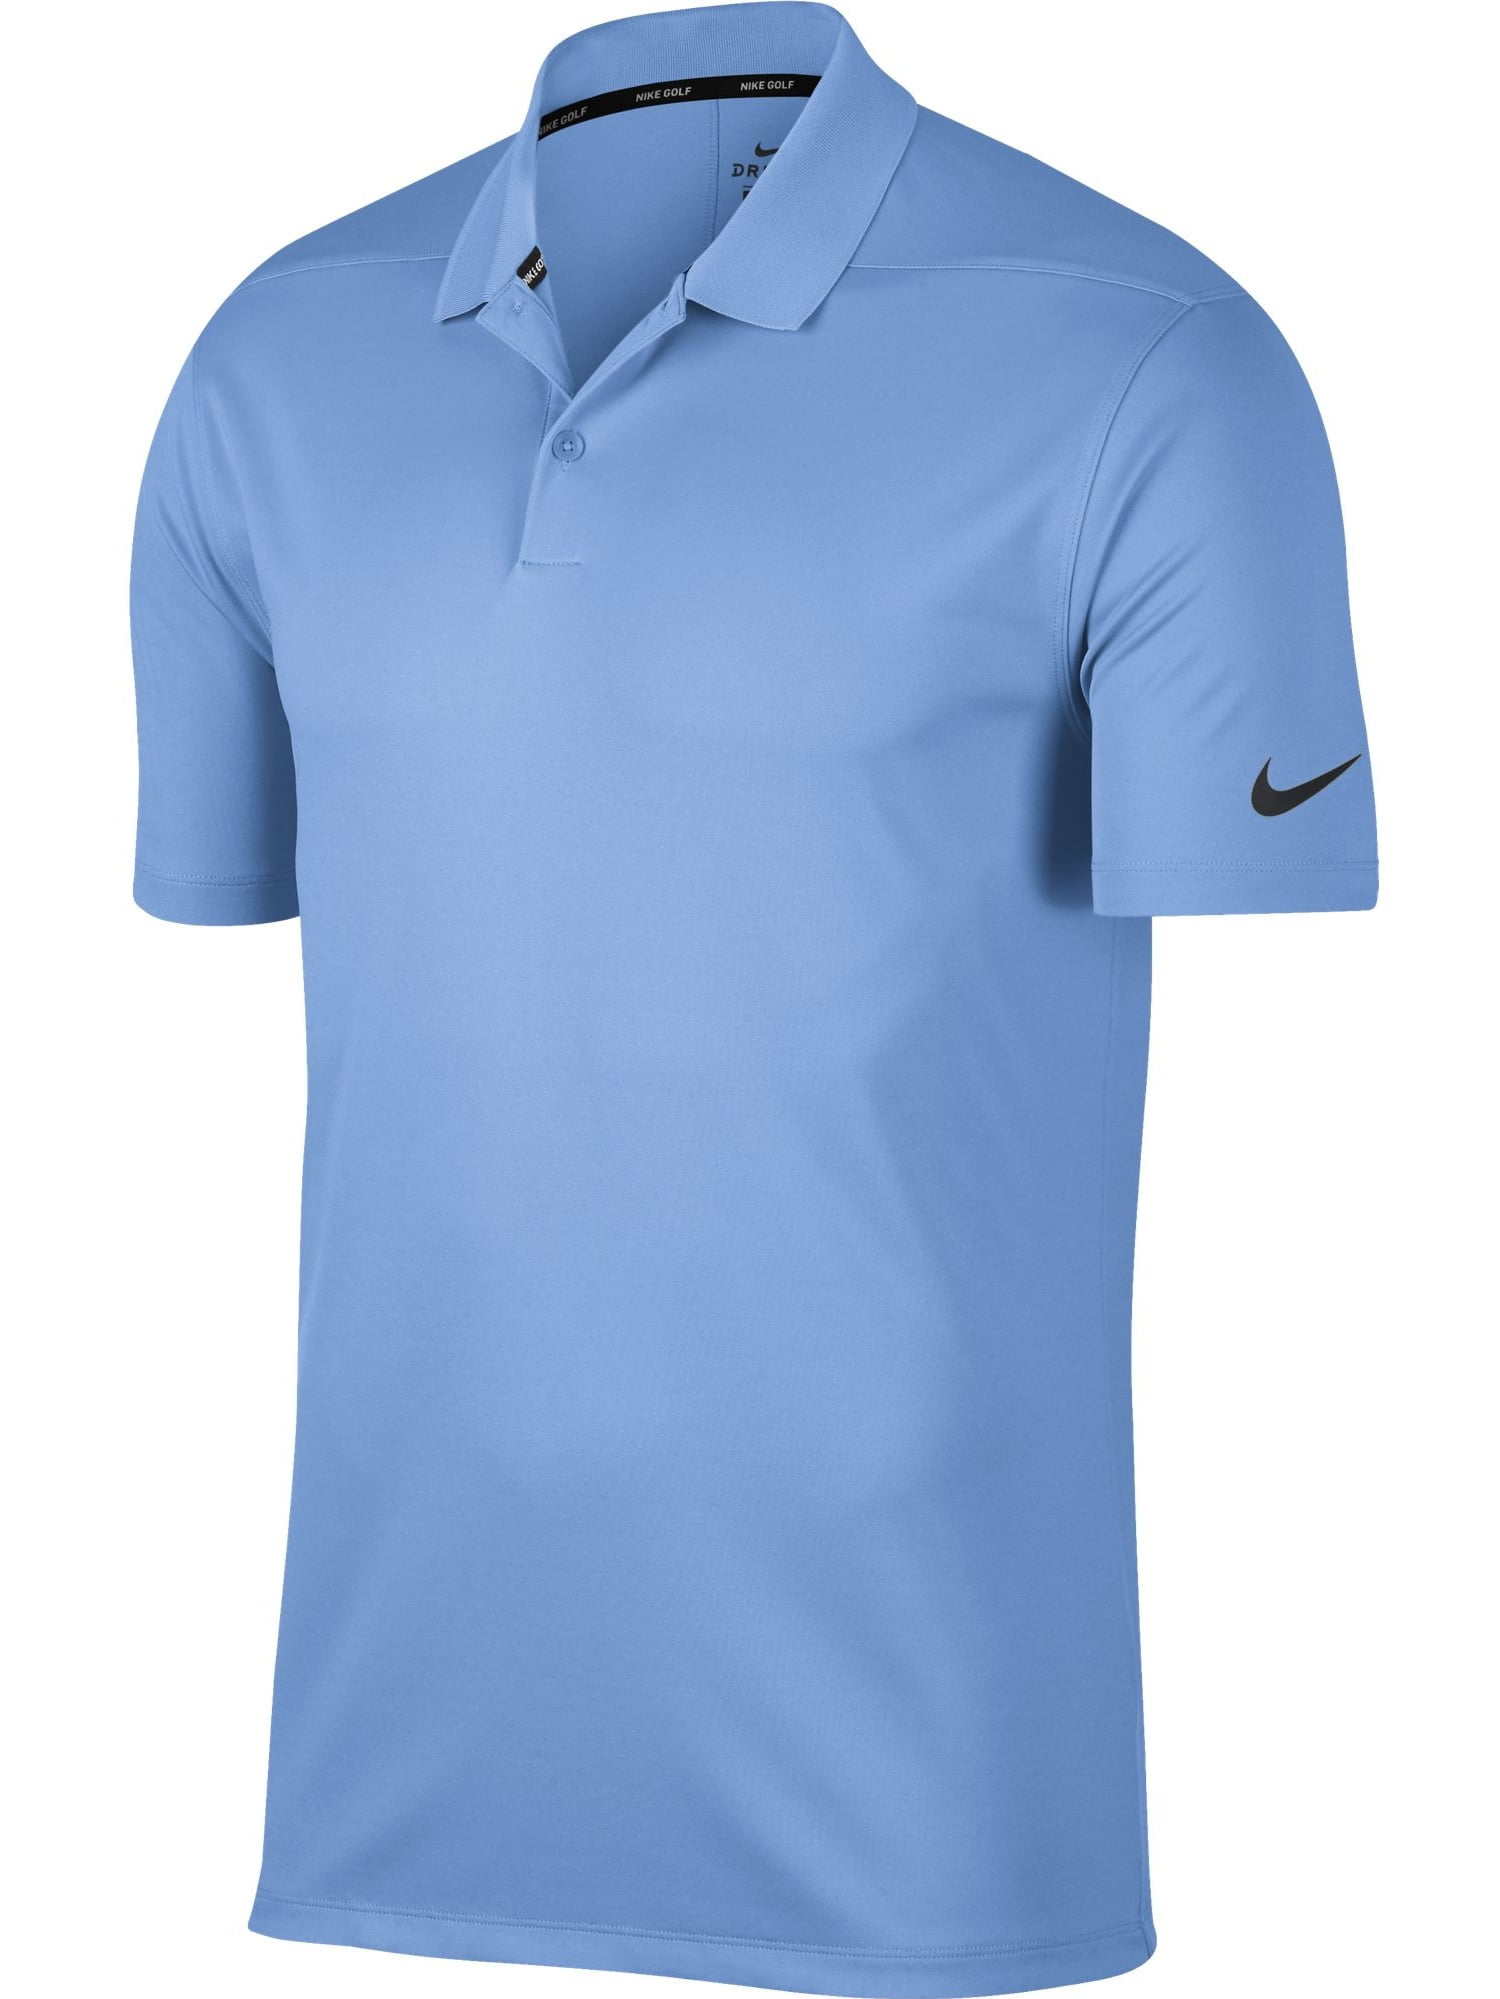 NEW 2018 Nike Dry Victory Solid Polo University Blue/Black Large Shirt ...